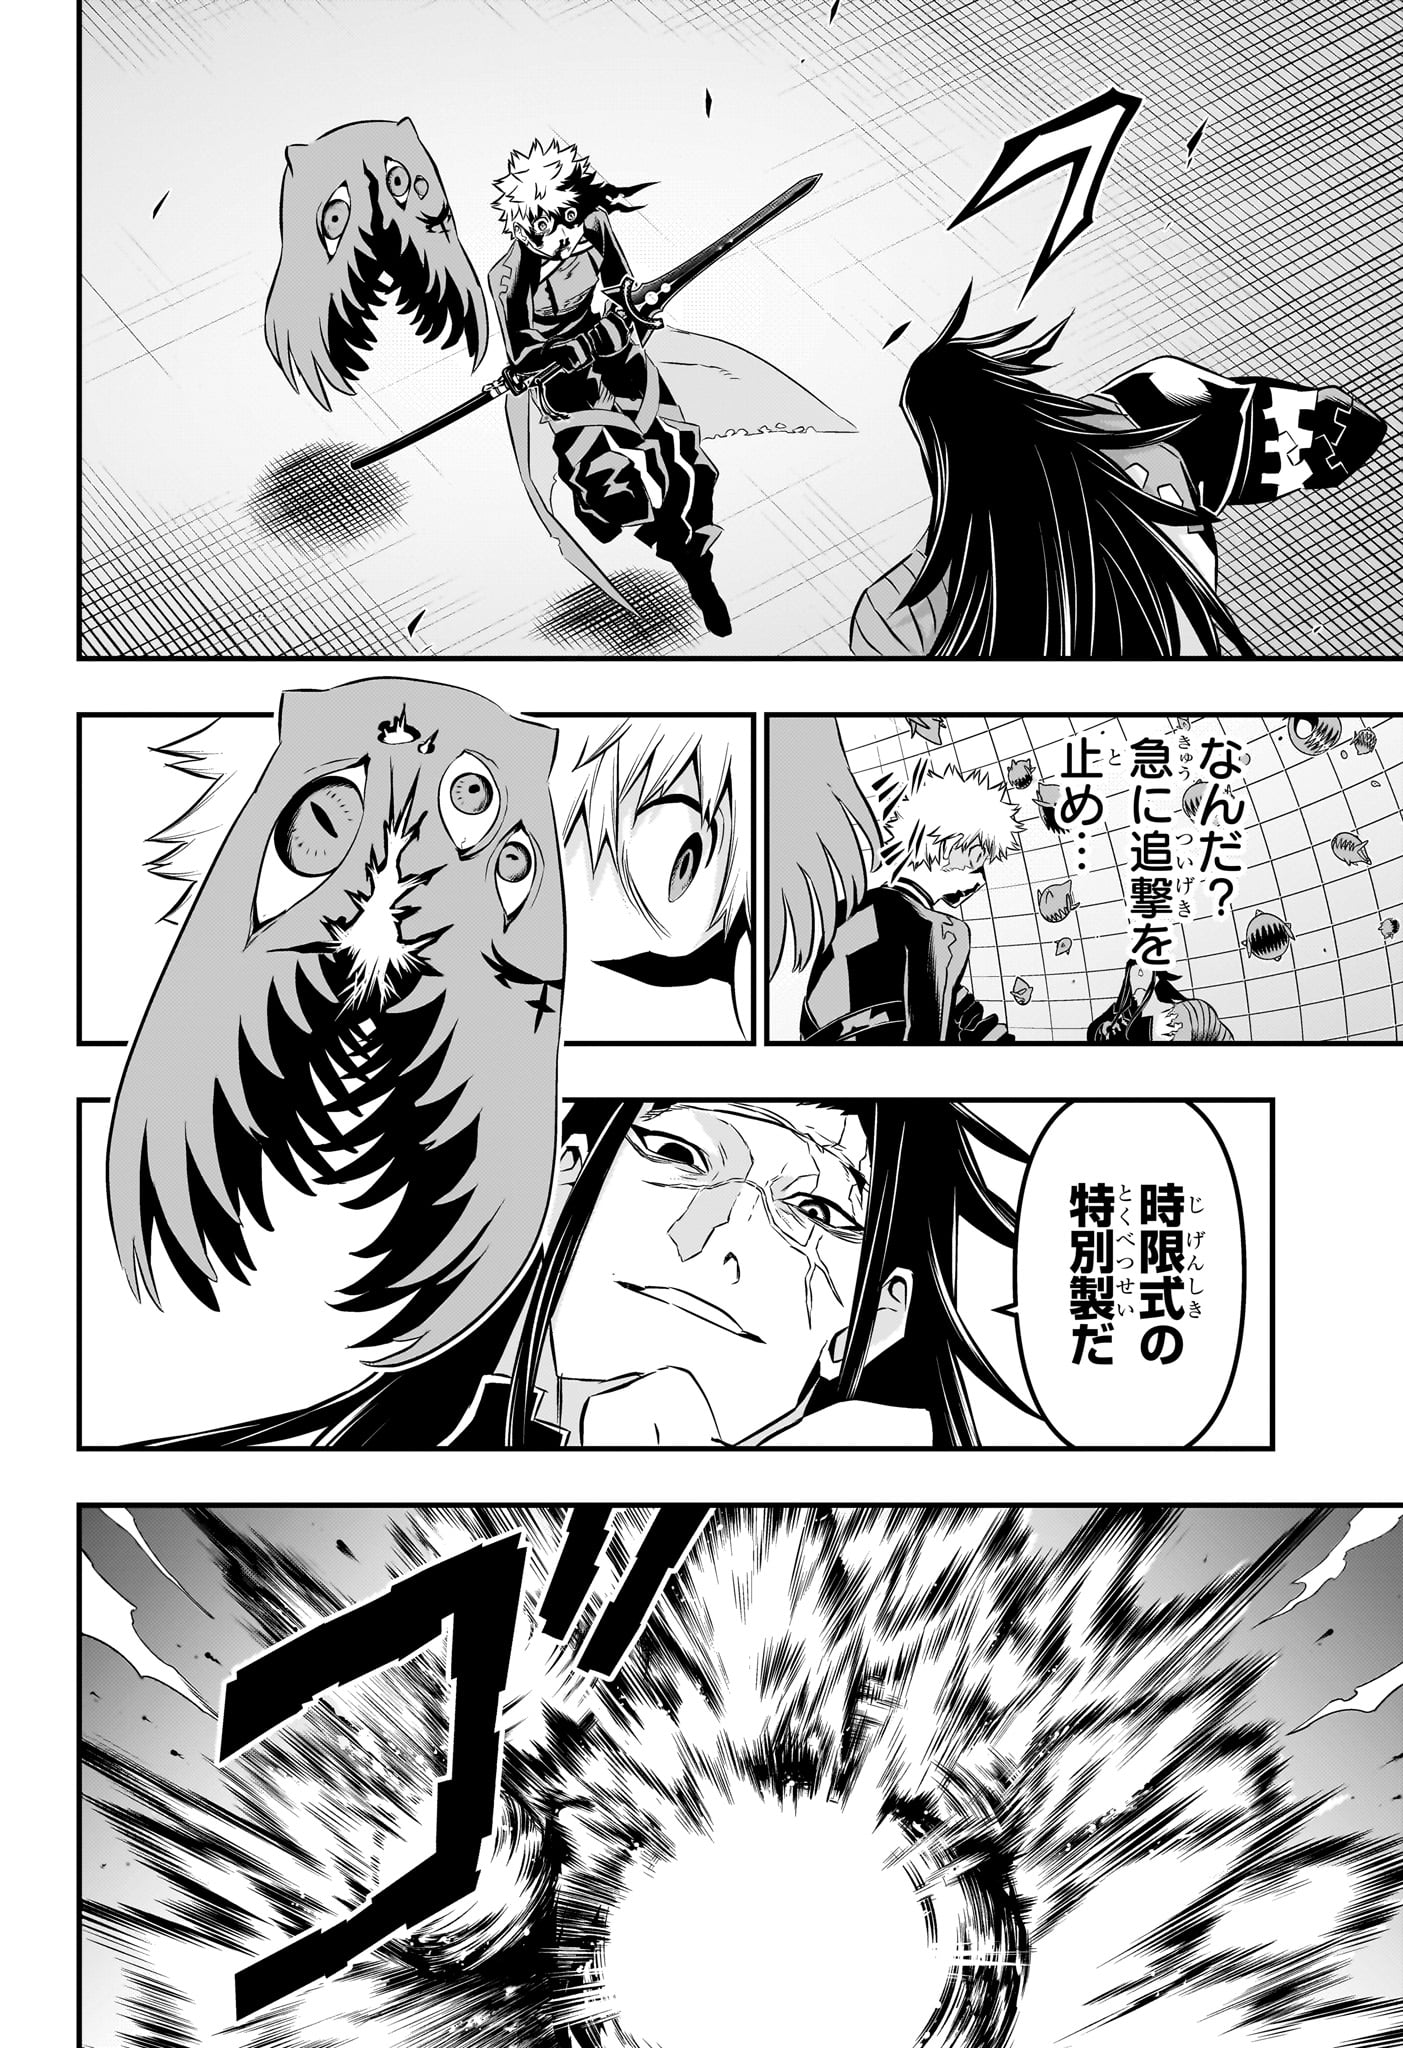 Nue no Onmyouji - Chapter 55 - Page 12